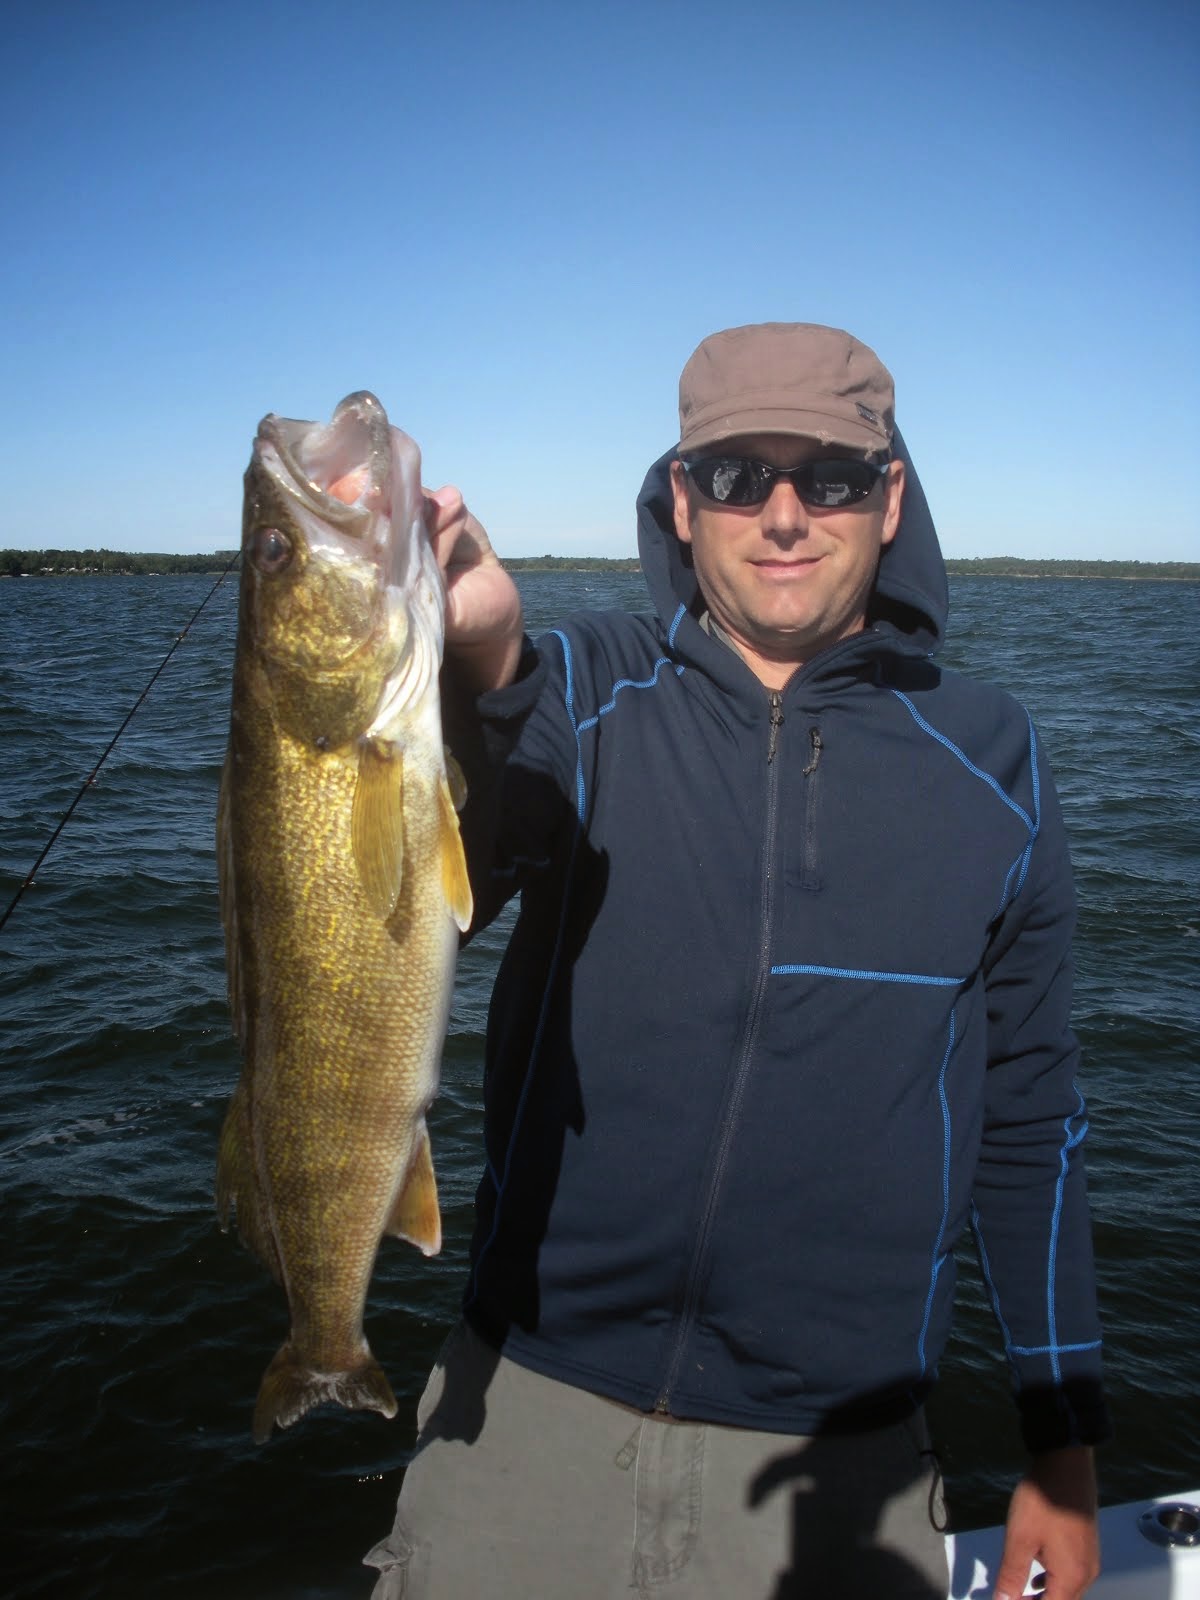 The Walleye bite is hot right now